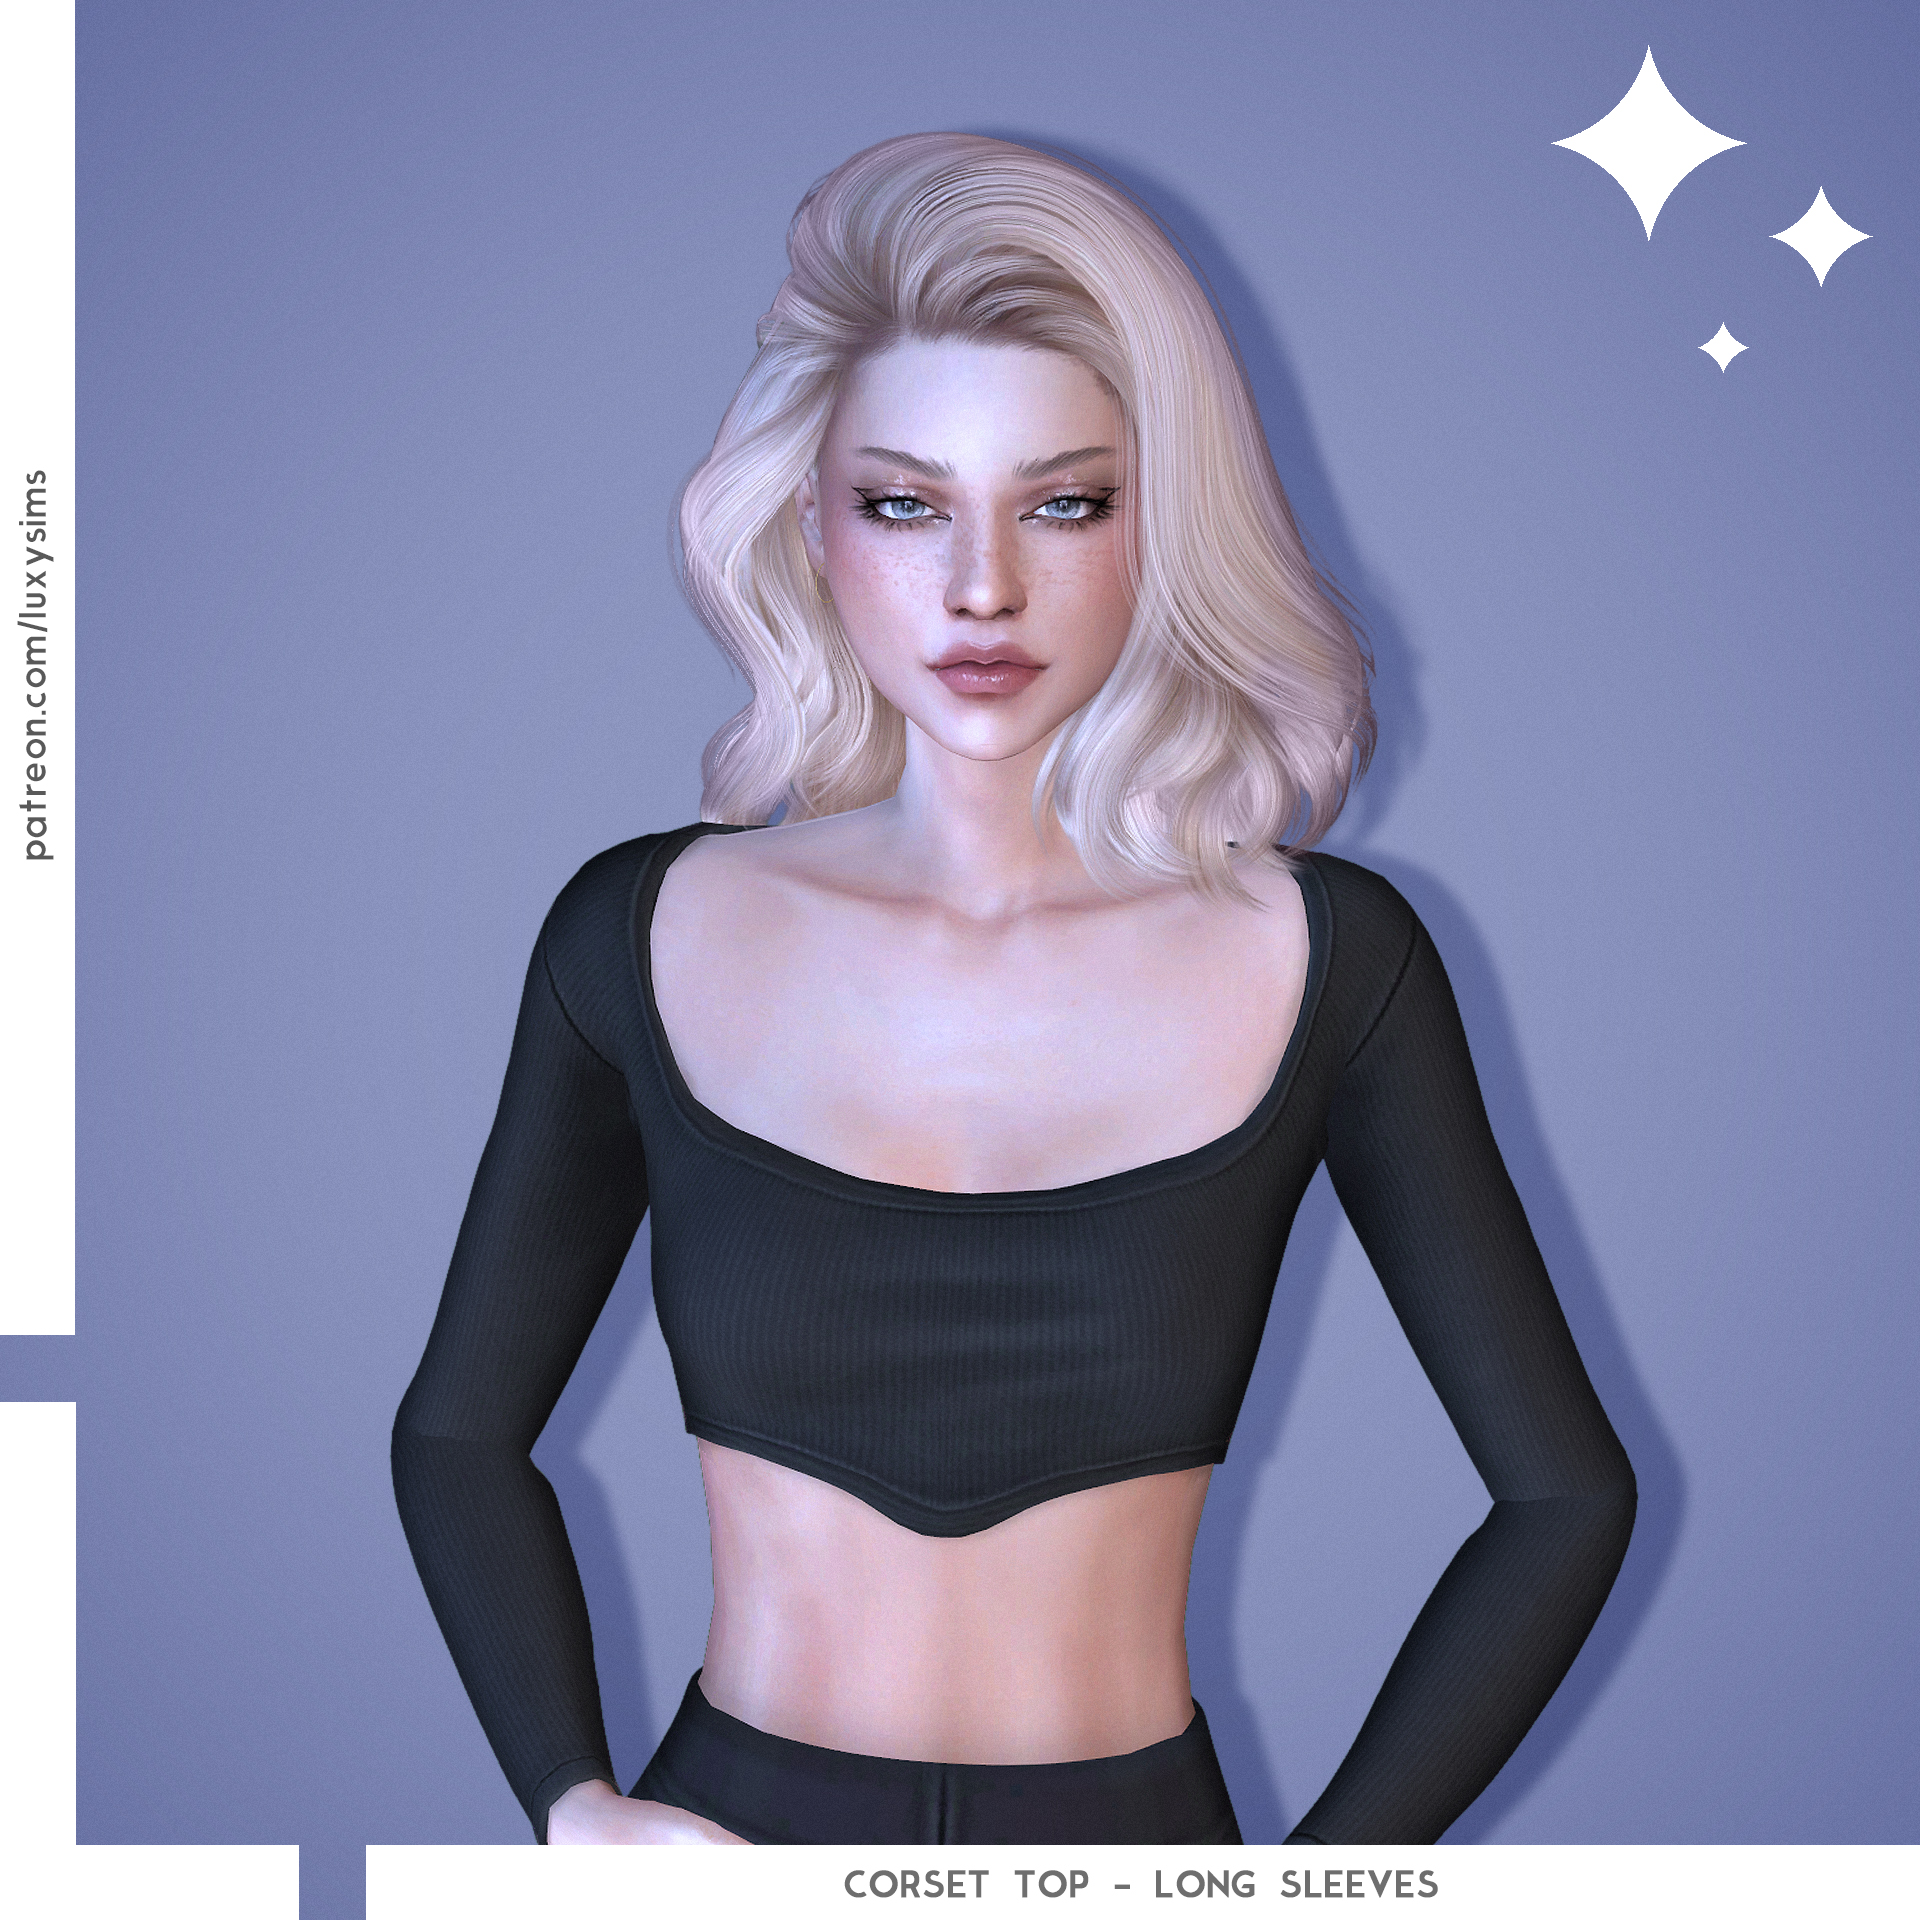 Corset Top - Long Sleeves project avatar